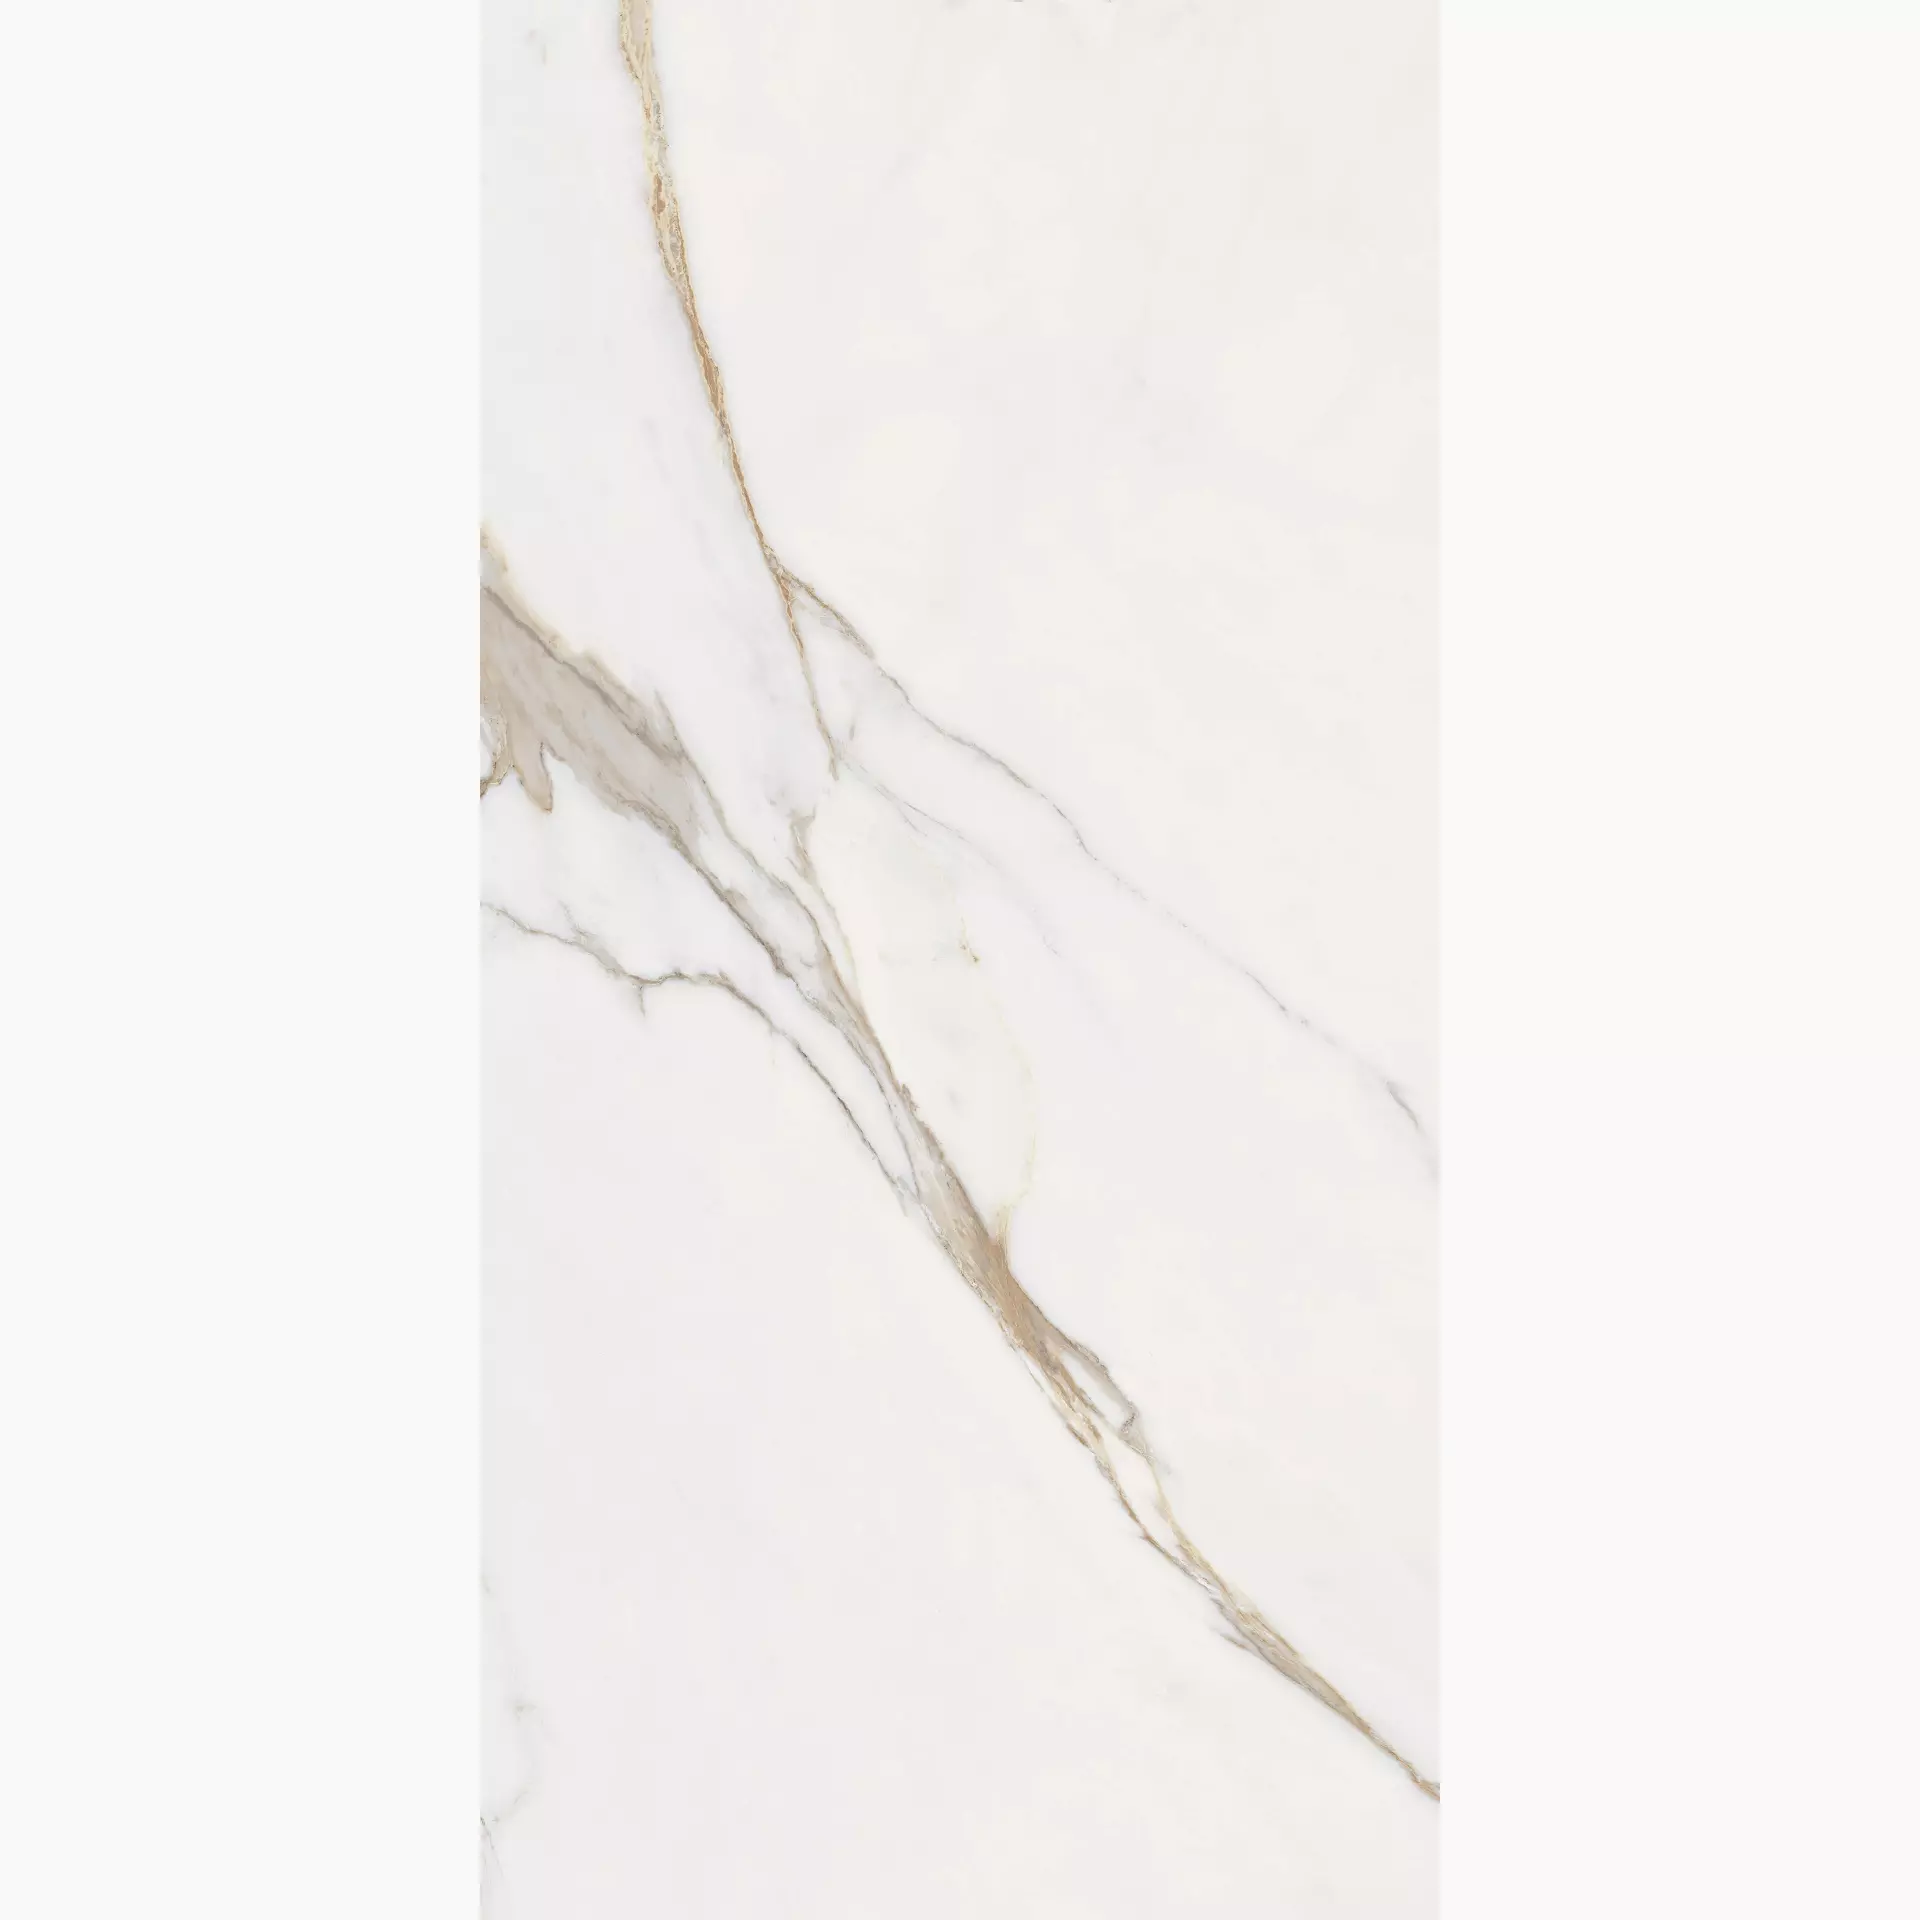 Keope Elements Lux Calacatta Gold Silky 4B323241 60x120cm rectified 9mm